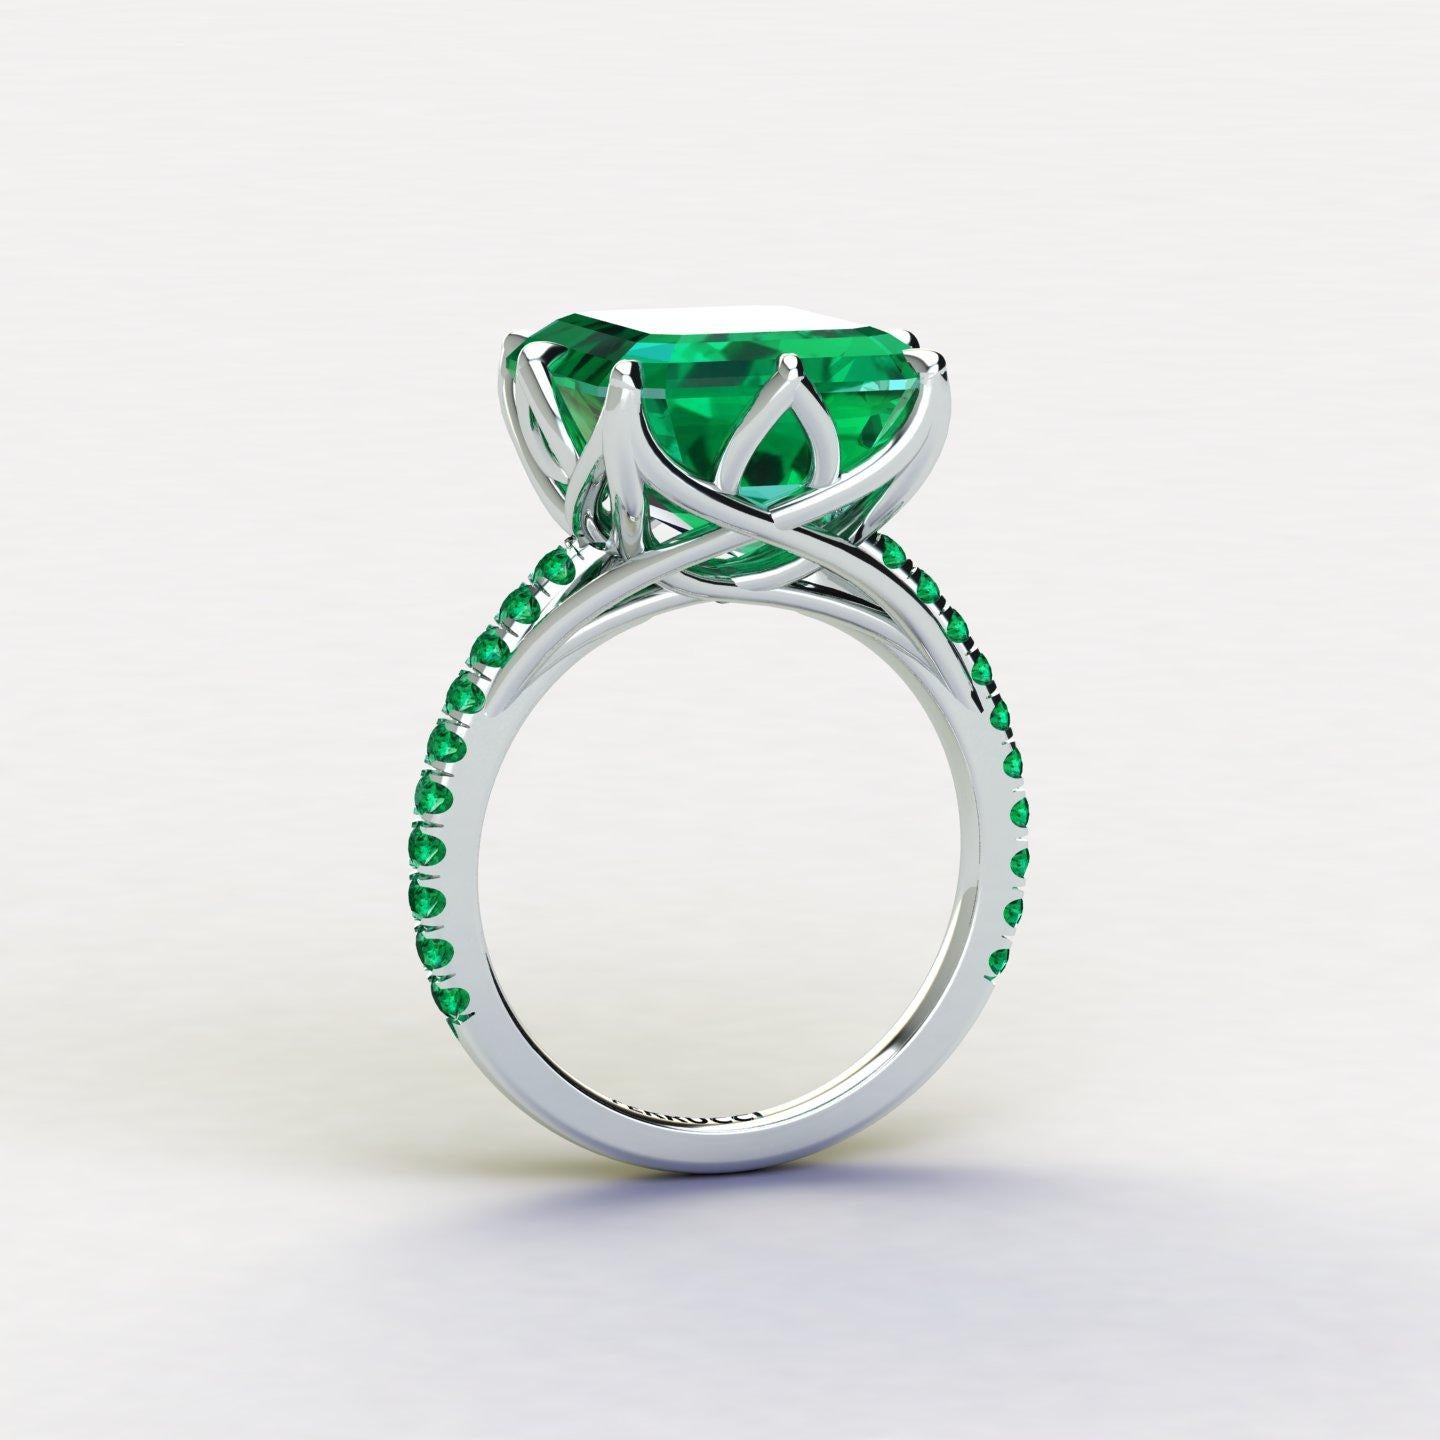 GRS Certified 6.31 carat Colombian emerald cut Emerald ring, very high quality color,  embellished by a pave' of bright green emeralds of approximately  a total carat weight of 0.32 carat, set in a hand crafted Platinum 950, created with the best